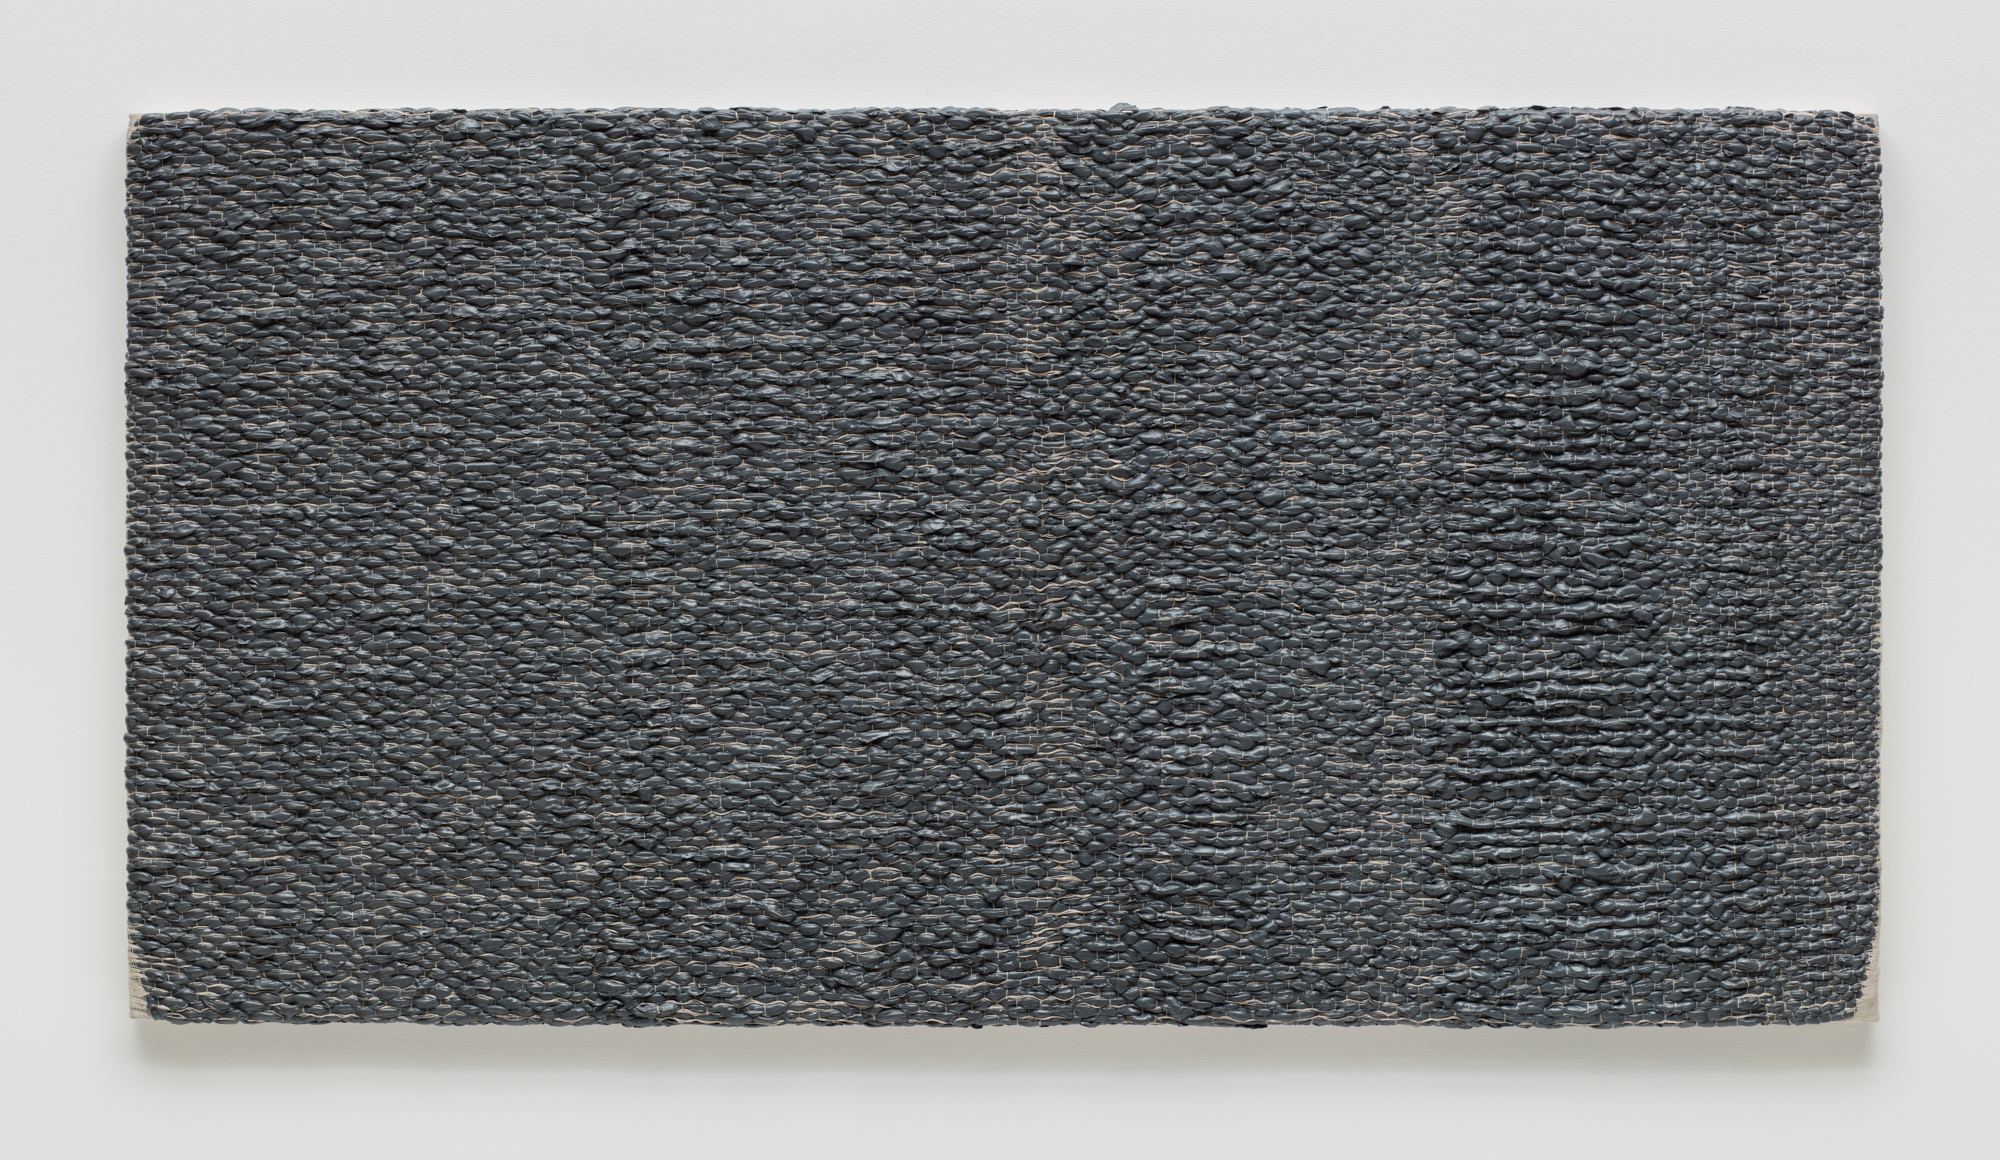 Analia Saban, Woven Solid as Warp, Horizontal (Gray) #1, 2017.  Acrylic paint woven through linen canvas on panel.  202.6 x 106 x 6.4 cm. Photo by Brian Forrest.